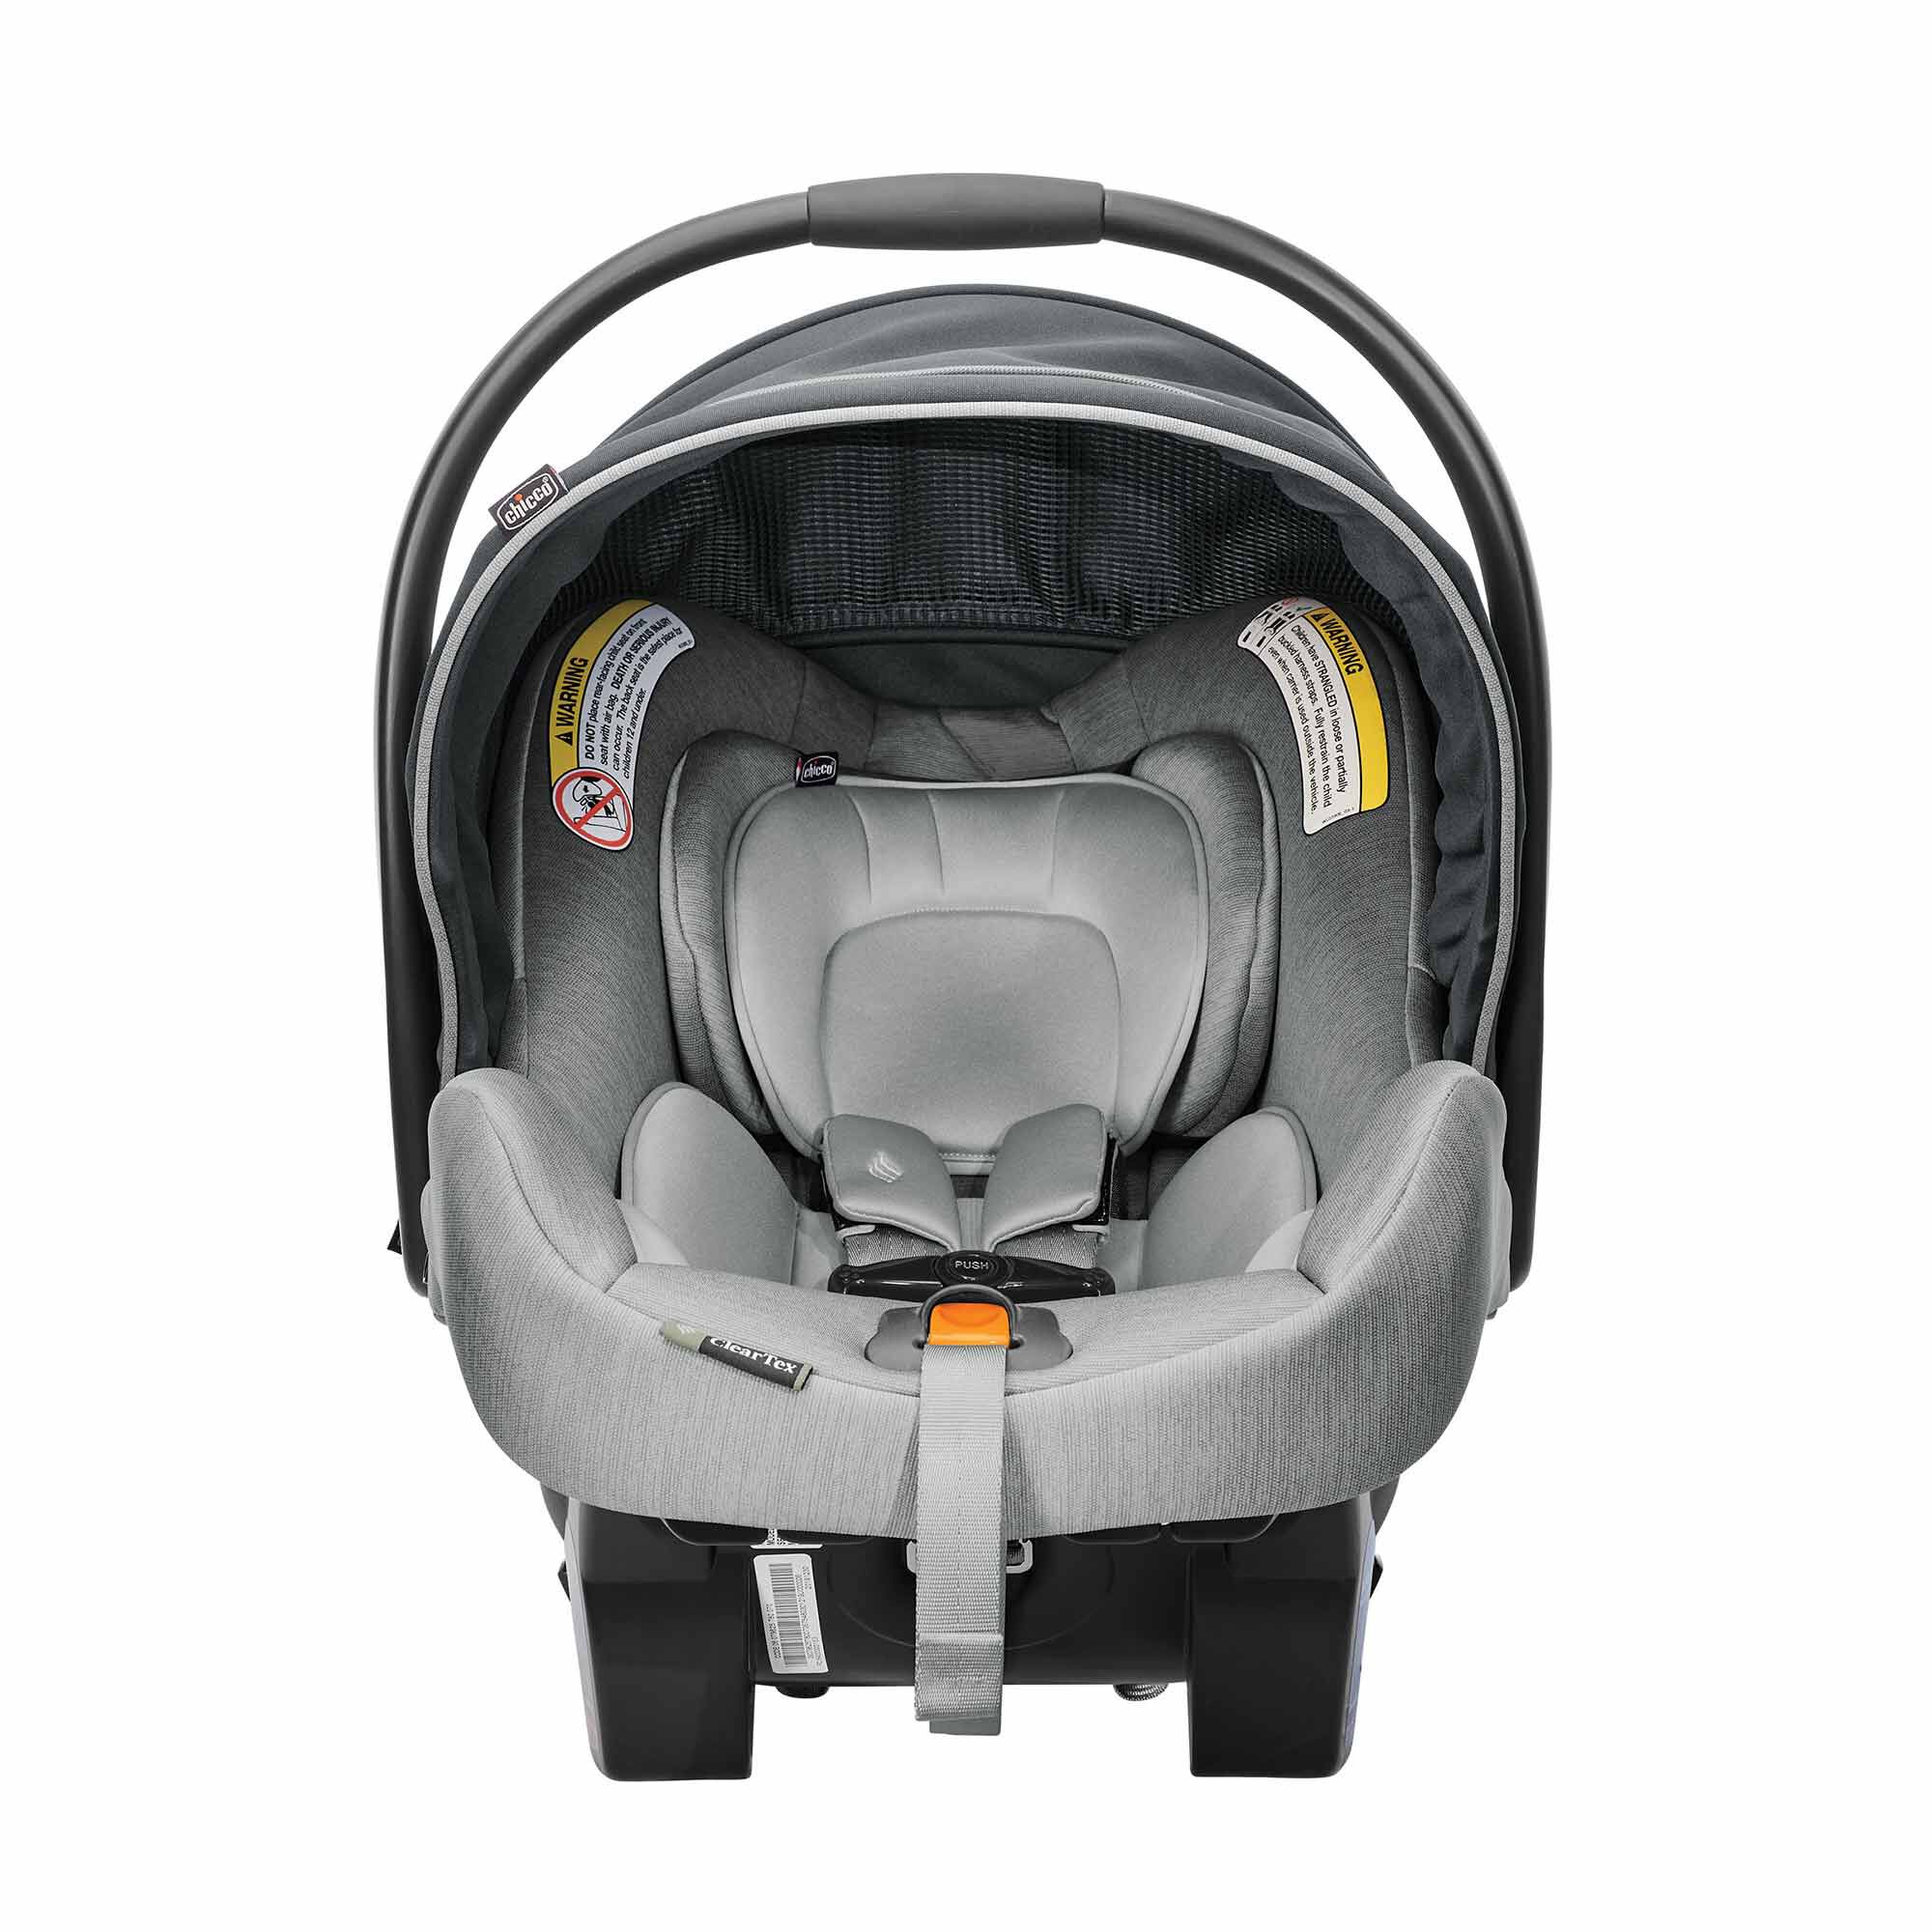 Chicco KeyFit 35 Zip ClearTex Infant Car Seat - Ash